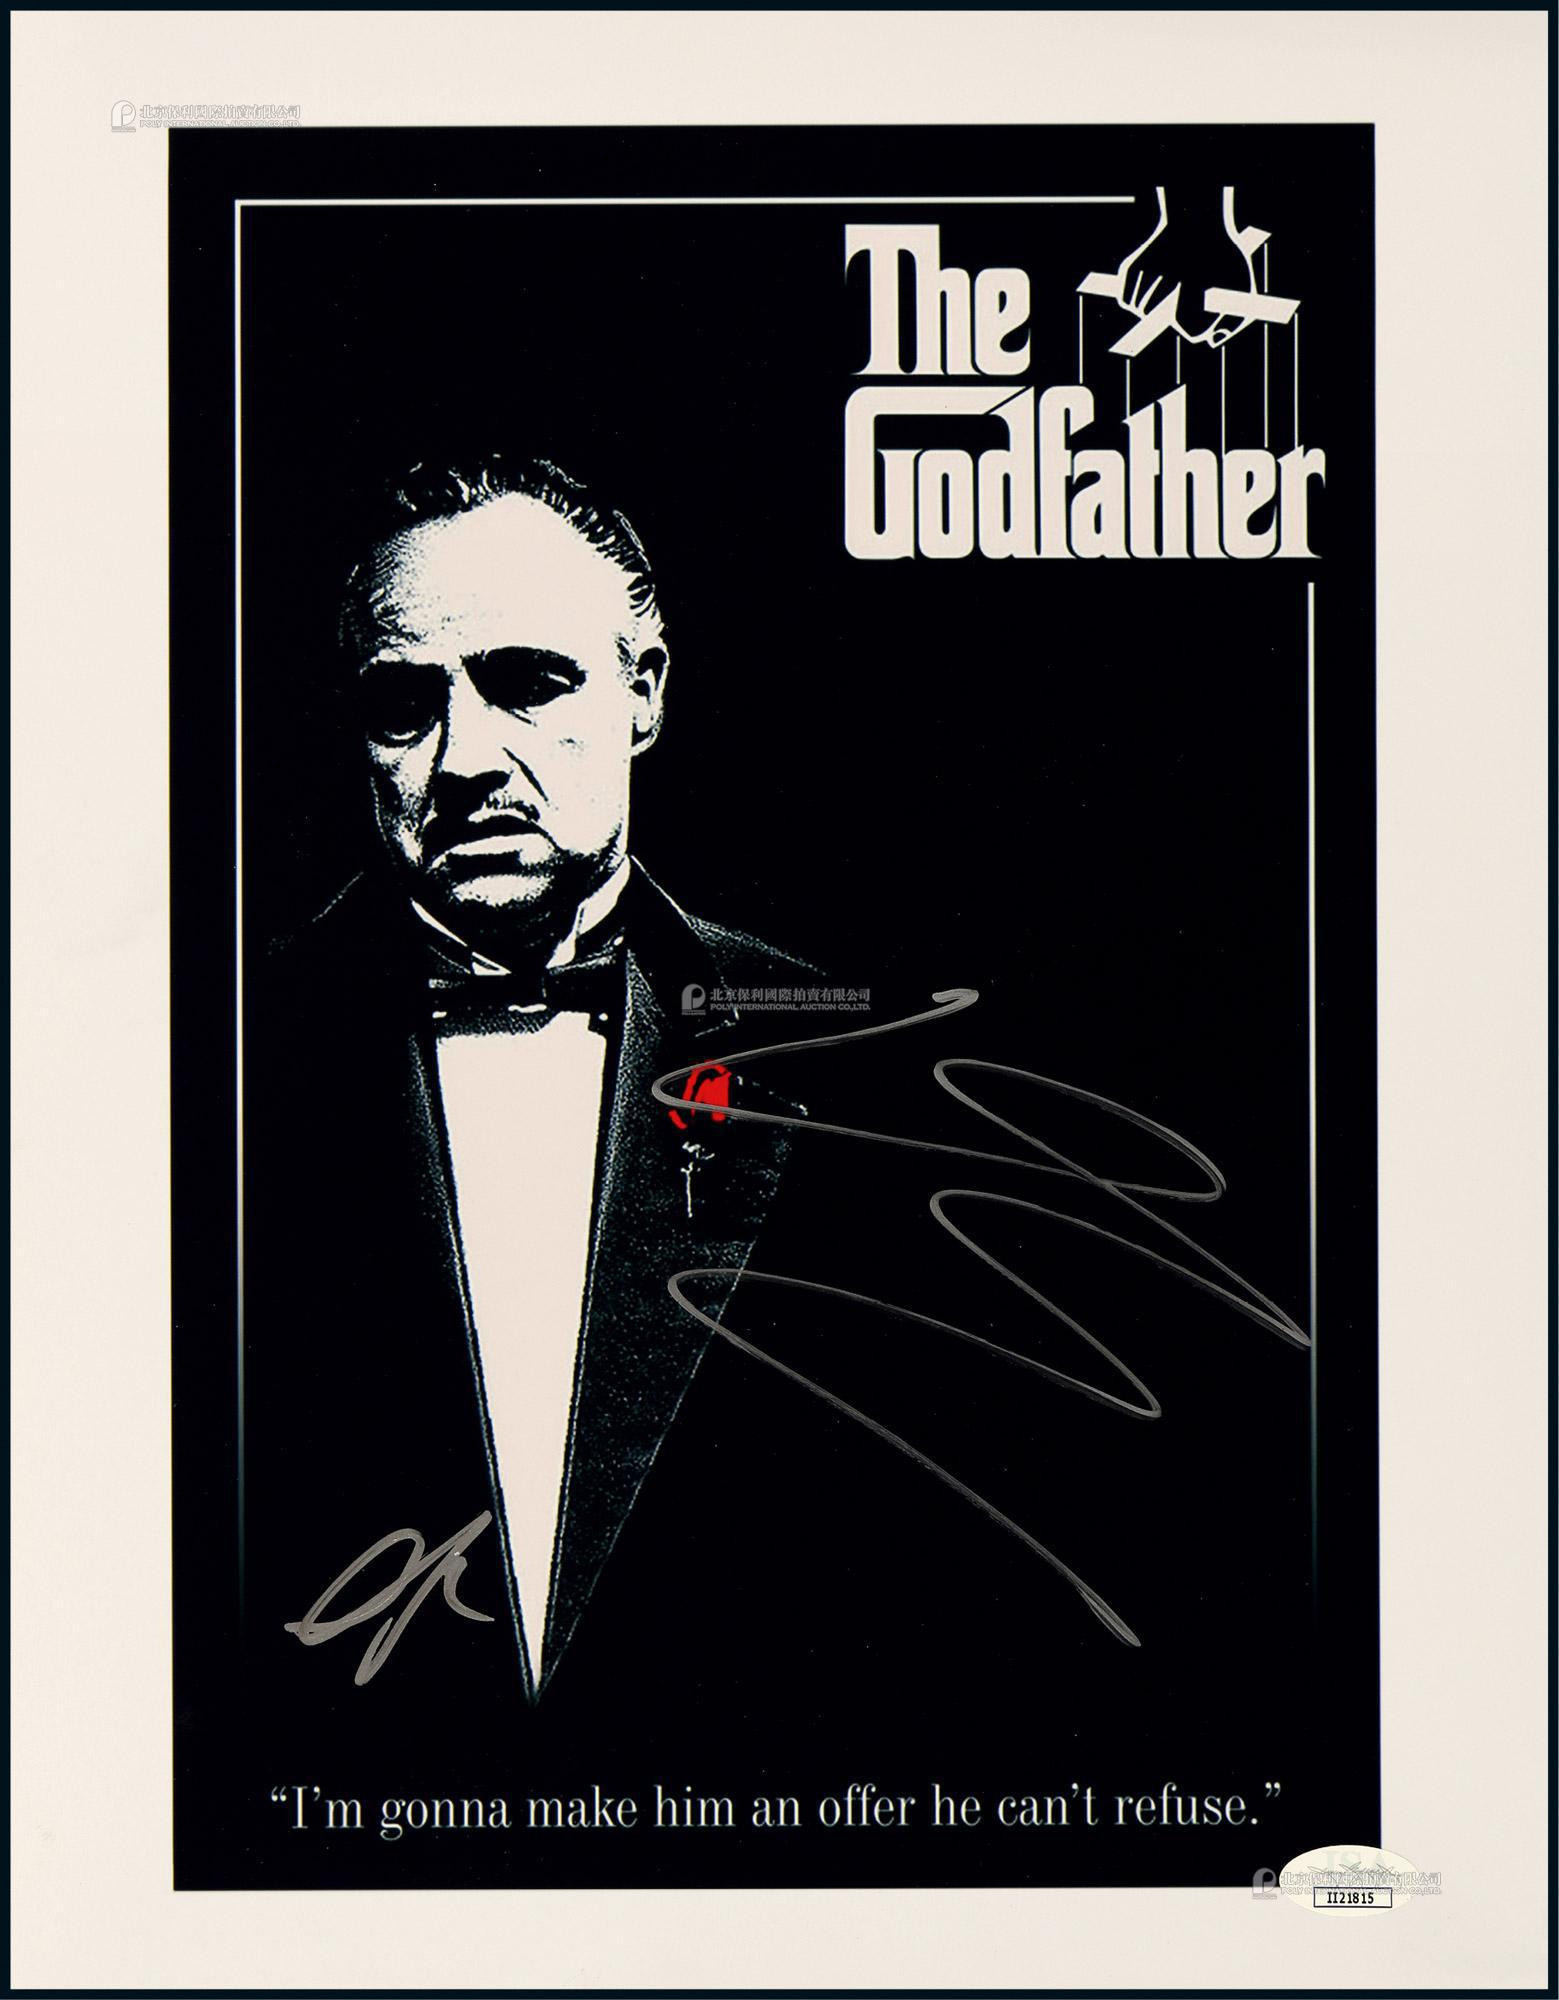 The autographed photo of Al Pacino and Diane Keaton, the hero and heroine of “The Godfather”, with a certificate